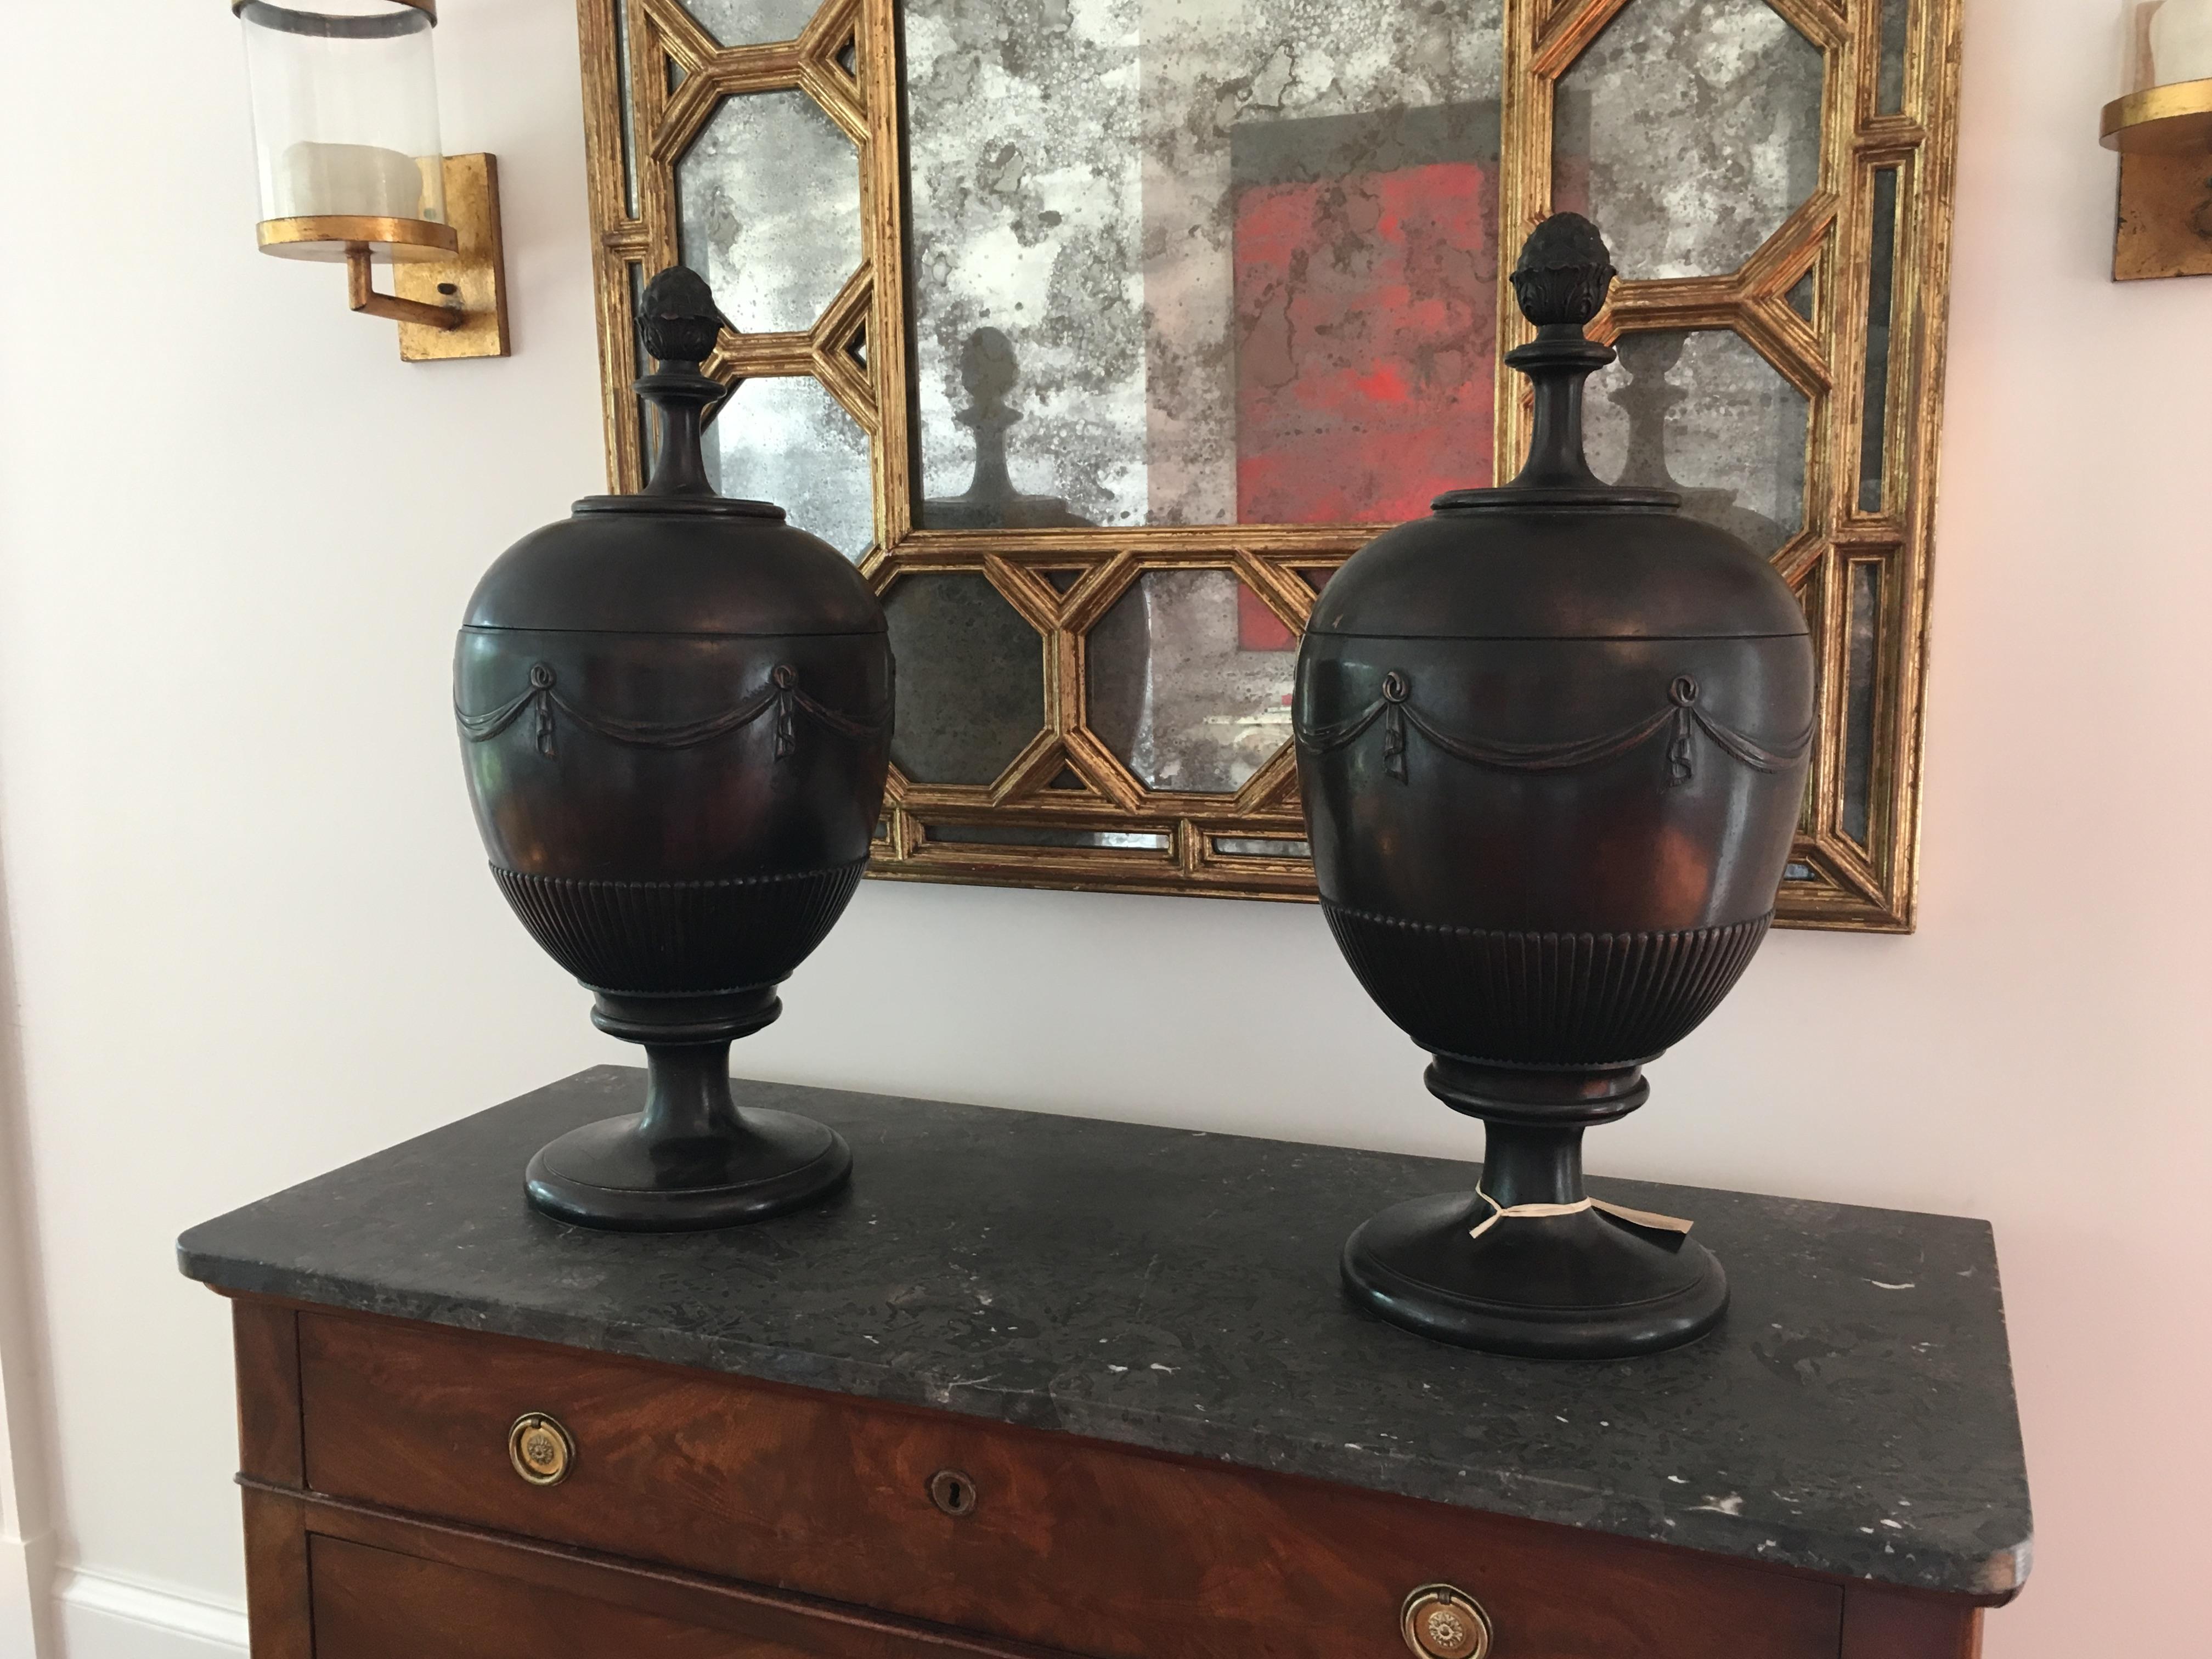 Pair of American mahogany urn shaped cutlery boxes with pineapple finials, carved ribbon swags followed by a line of beading, original cutlery inserts, and resting on turned round bases.

One urn has loss at the edge of the top - see photo. Also